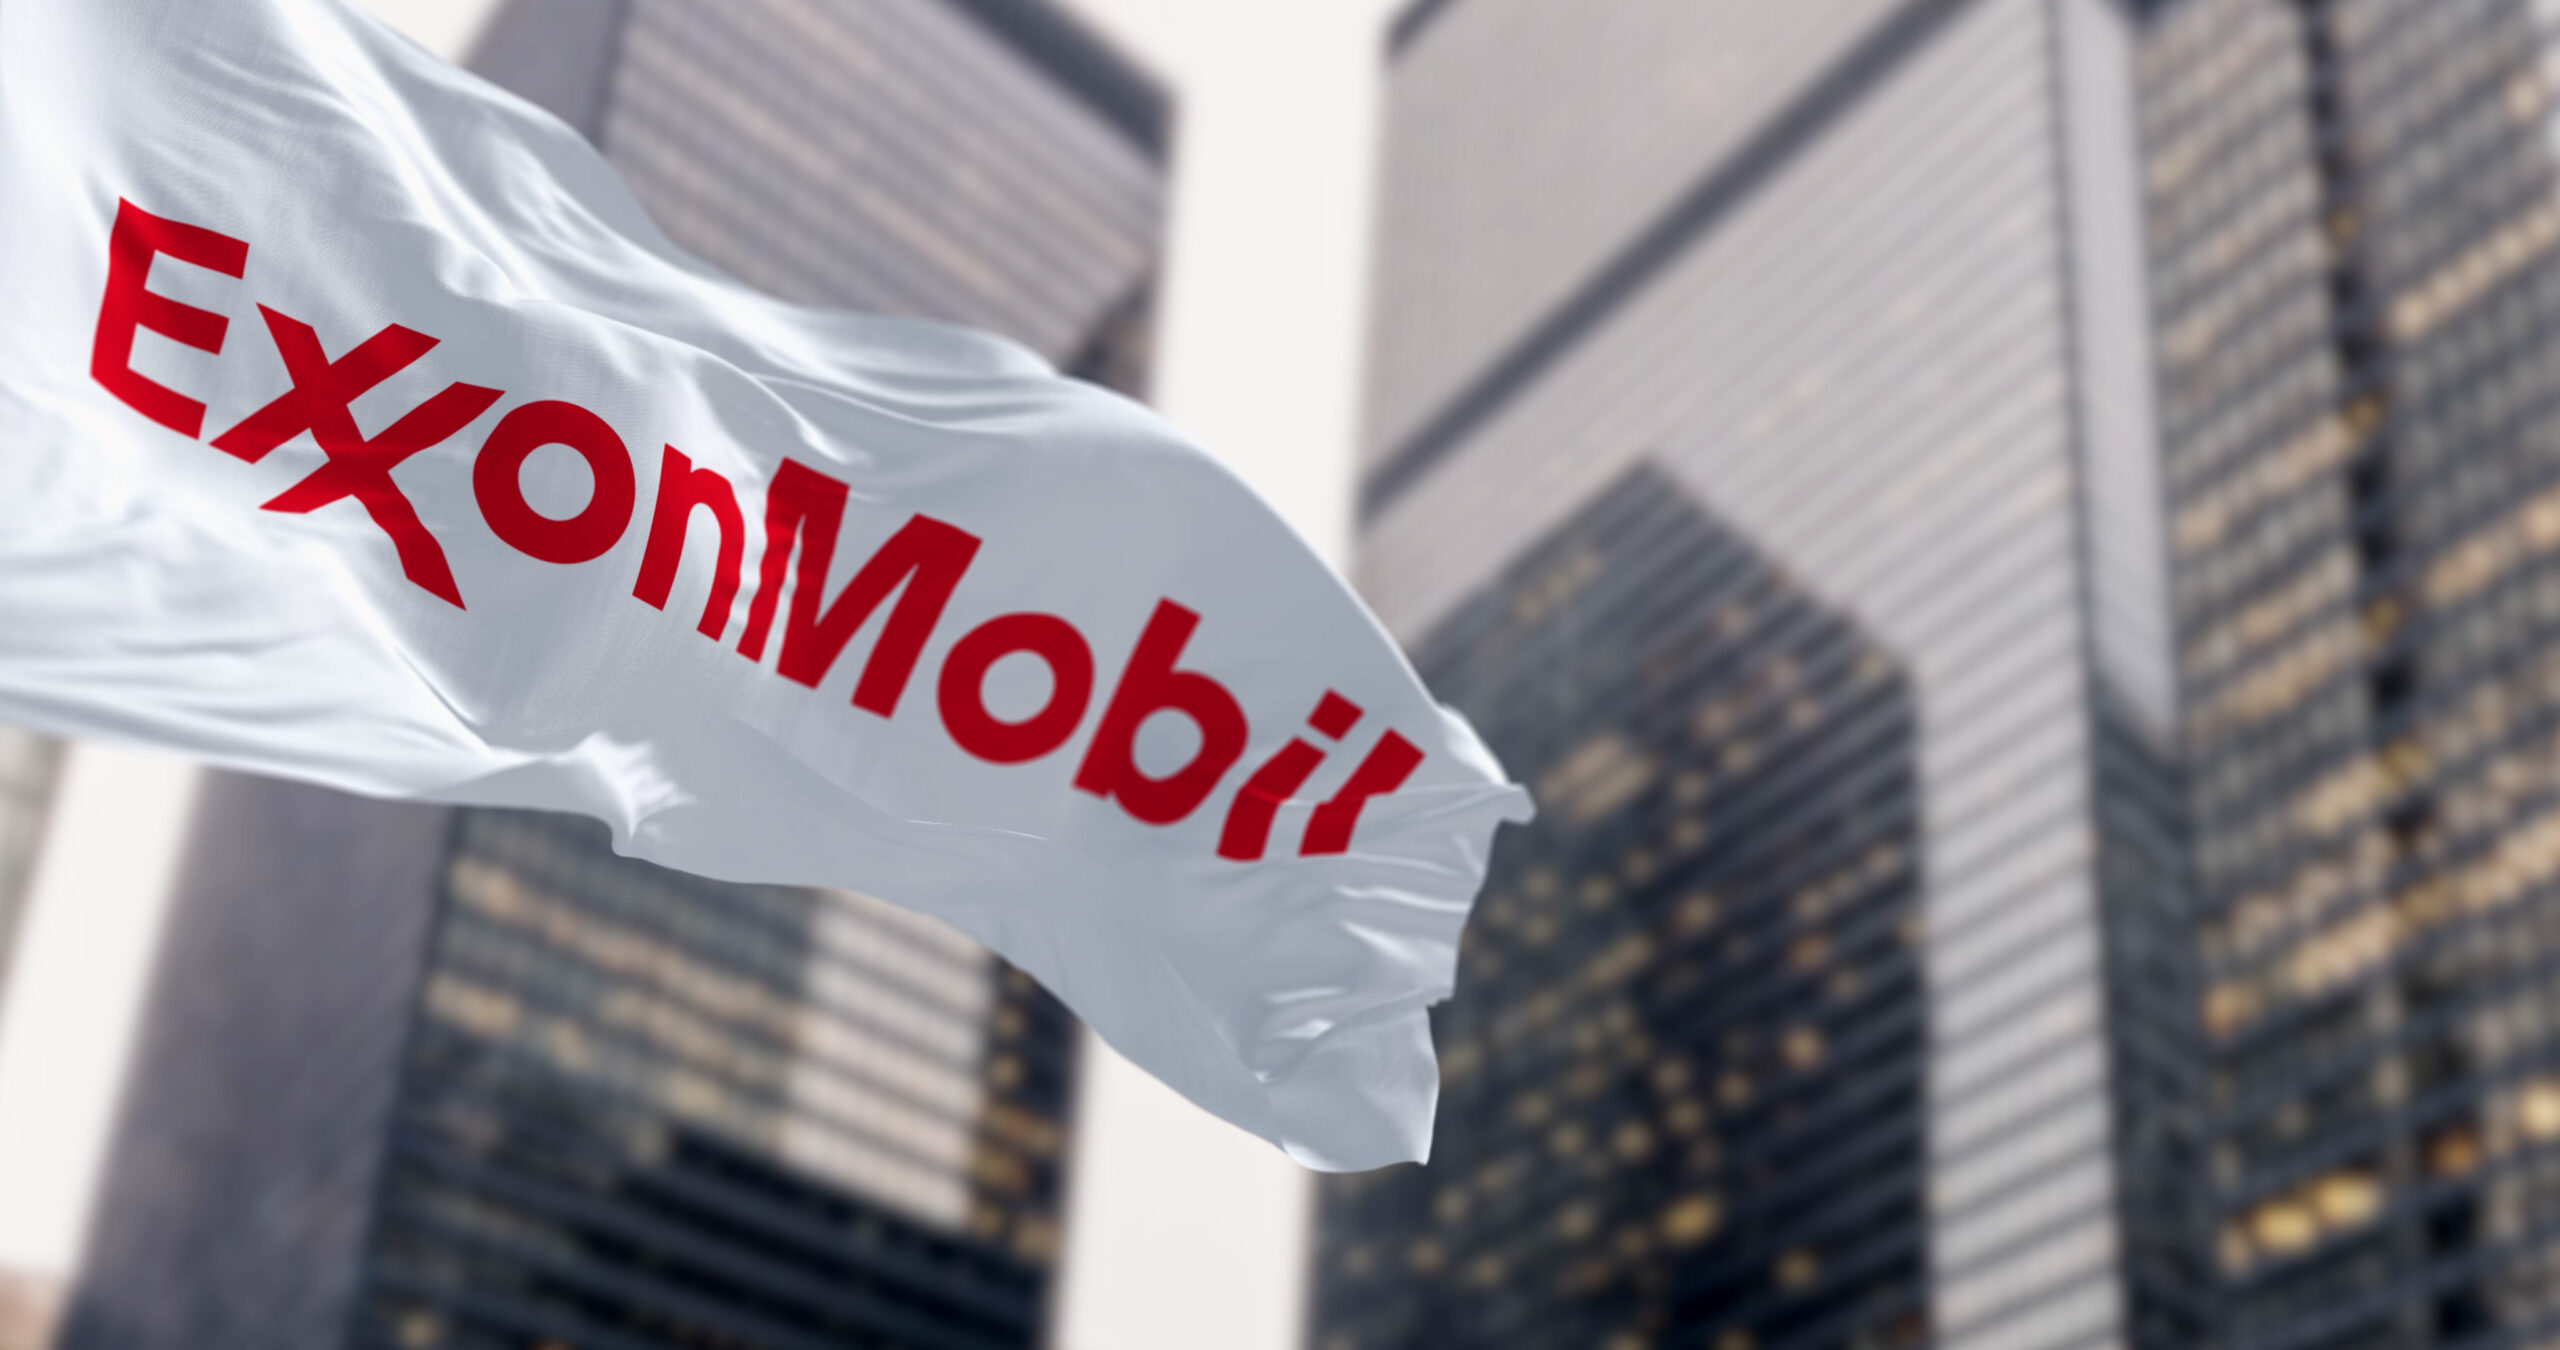 ExxonMobil flag waving in the wind in a financial district